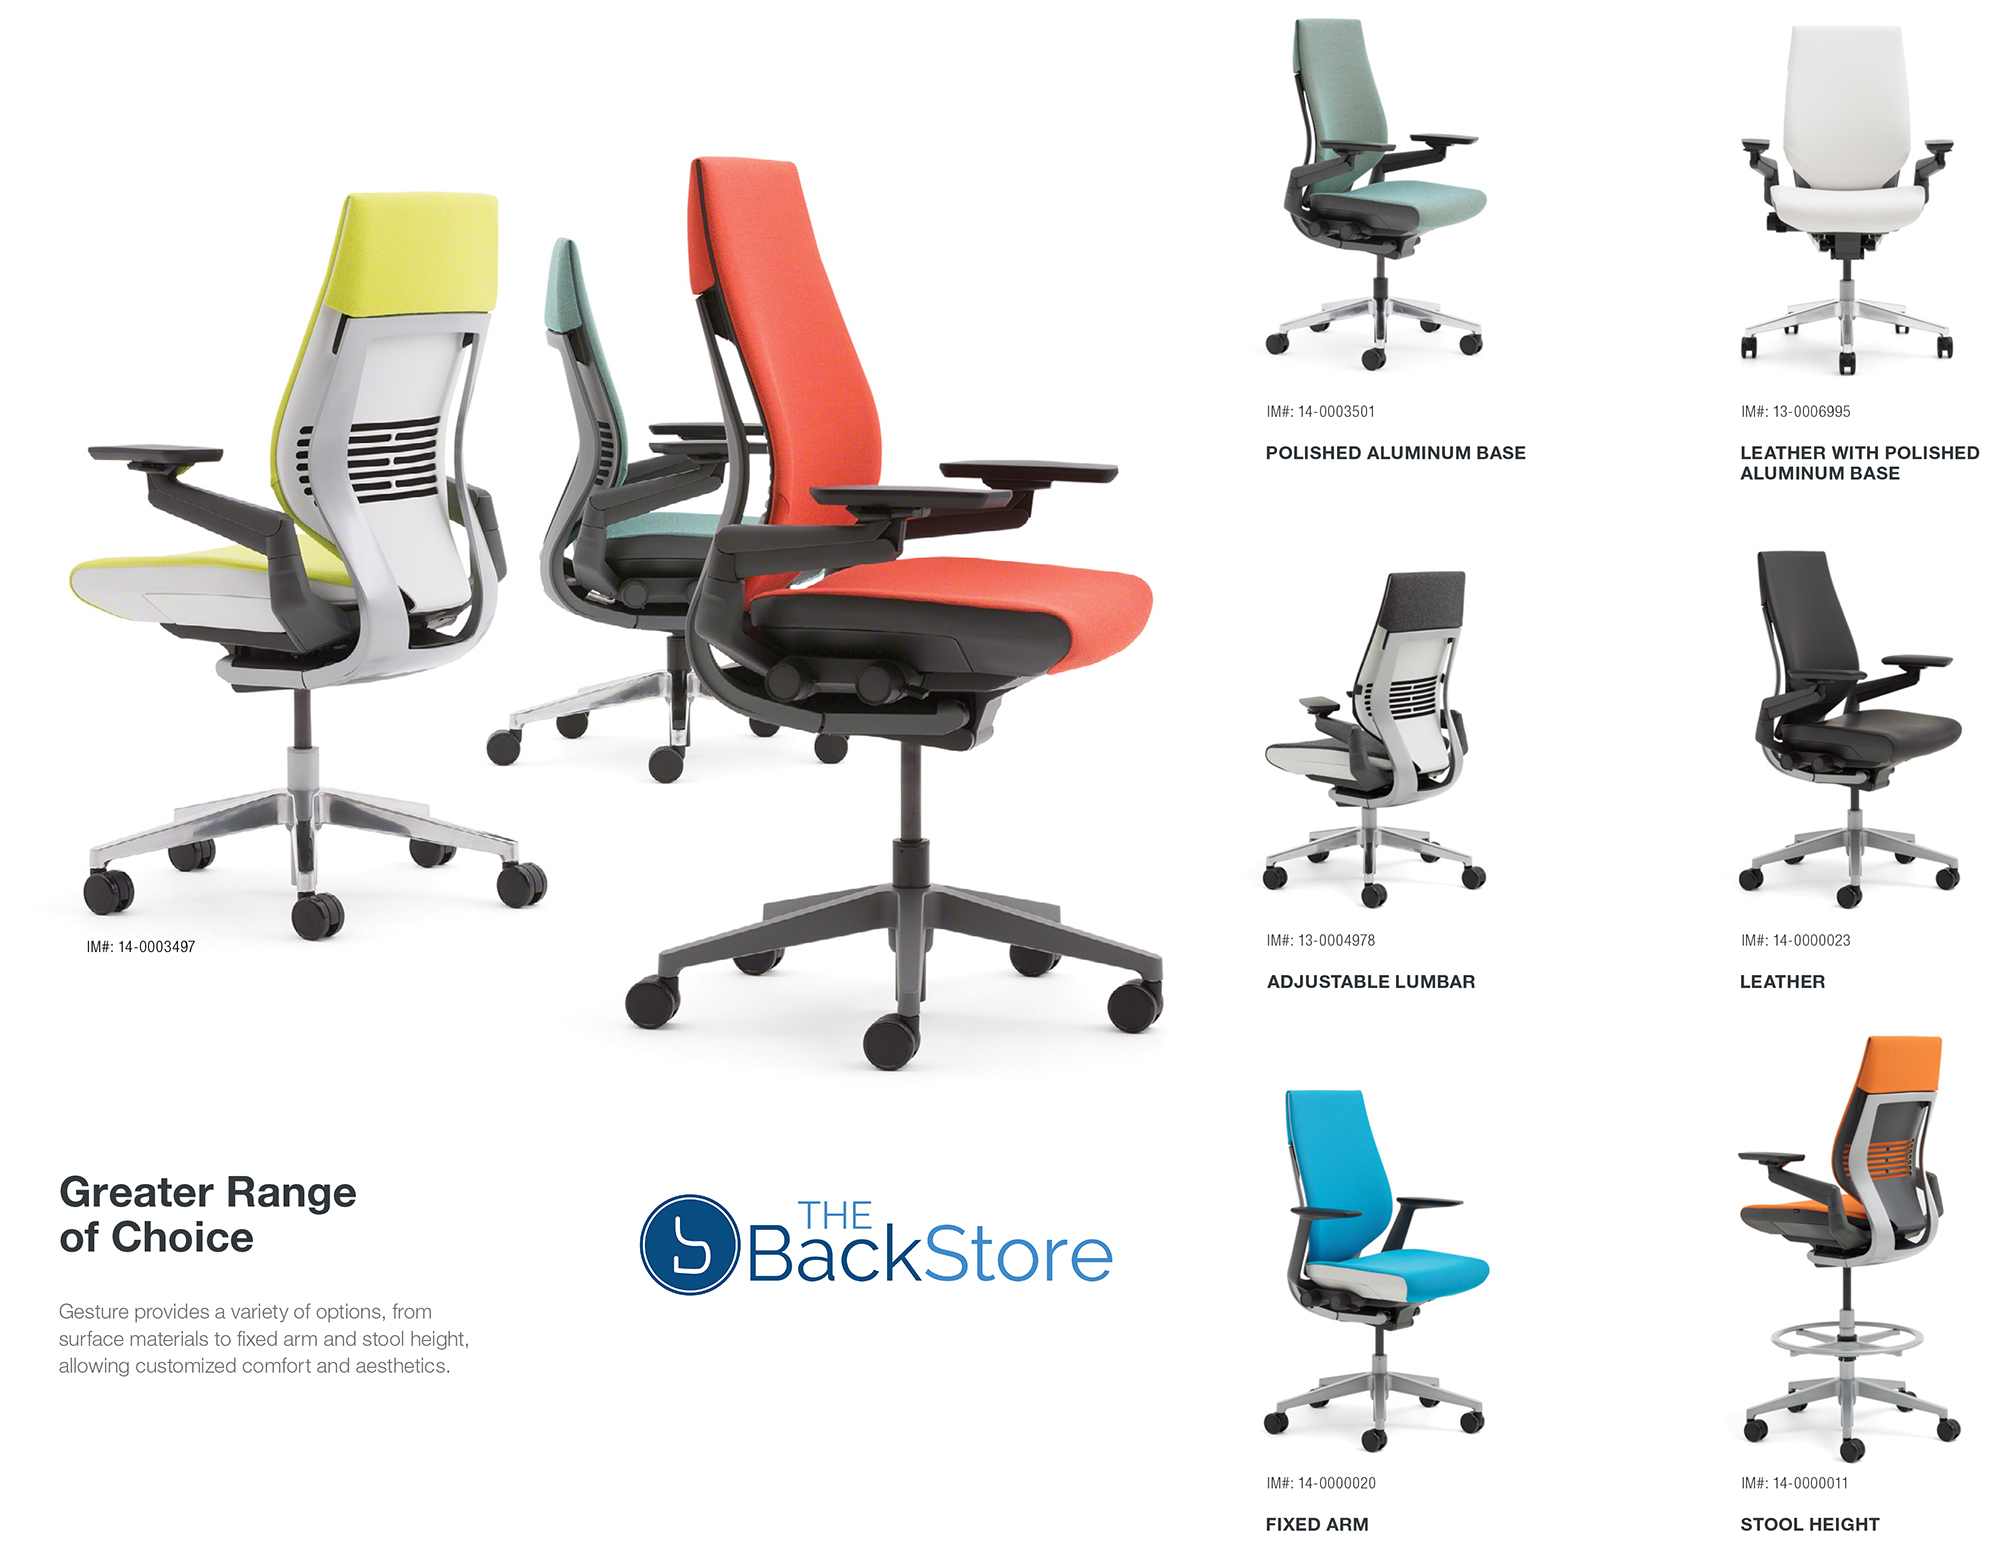 Steelcase Chair Height Adjustment | lupon.gov.ph